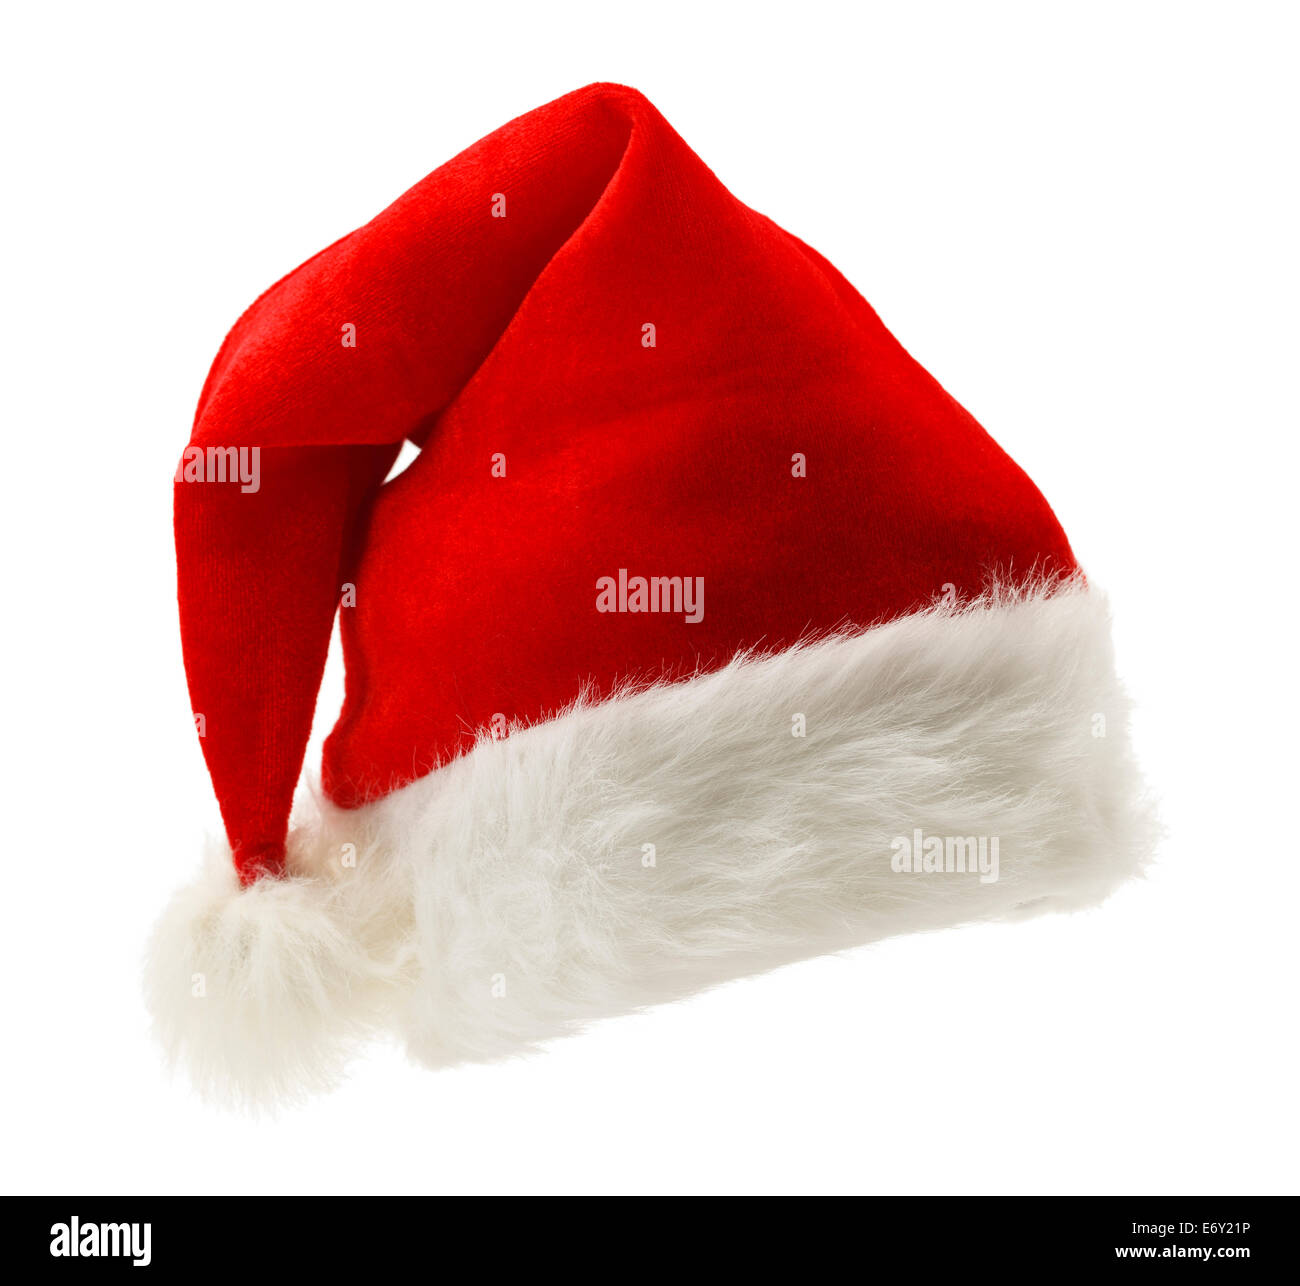 Red and White Christmas Santa furry Stocking Hat Isolated on White Background. Stock Photo